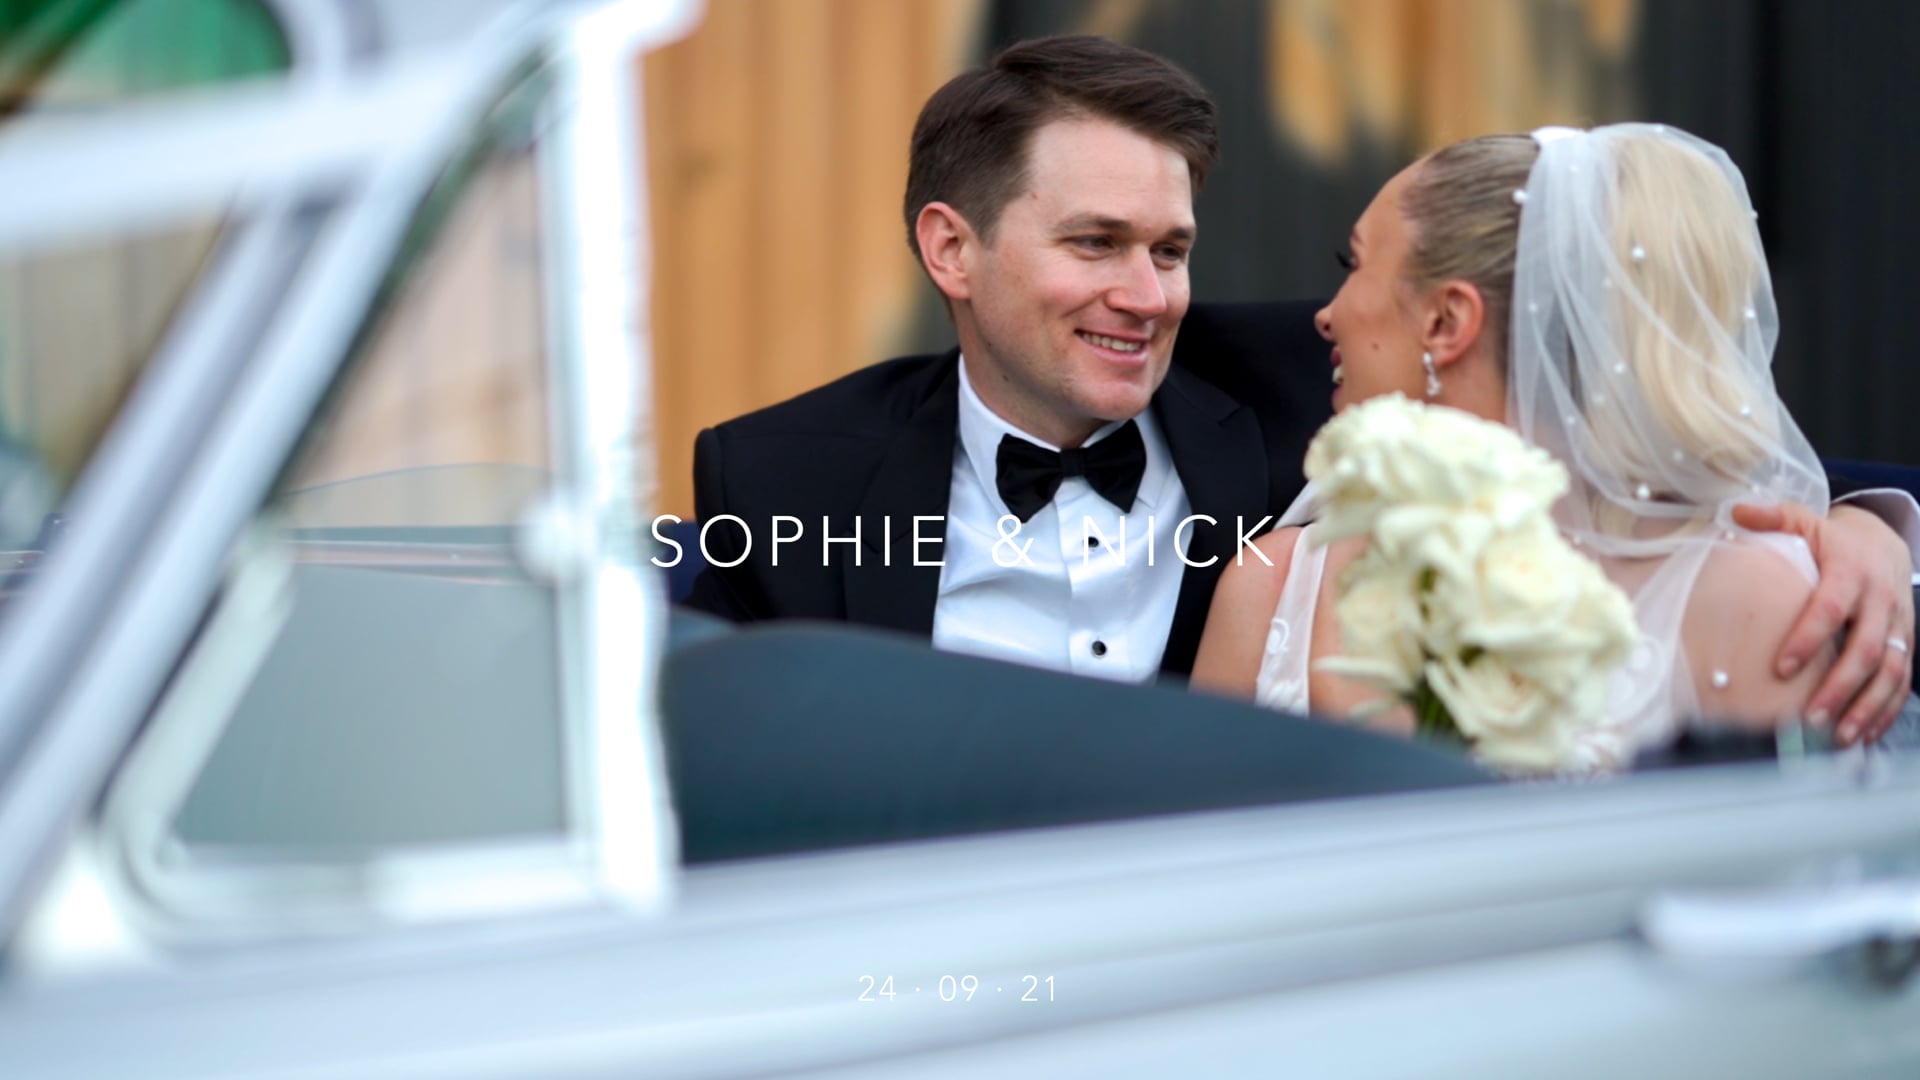 Sophie & Nick ◦ The Refinery ◦ Highlight